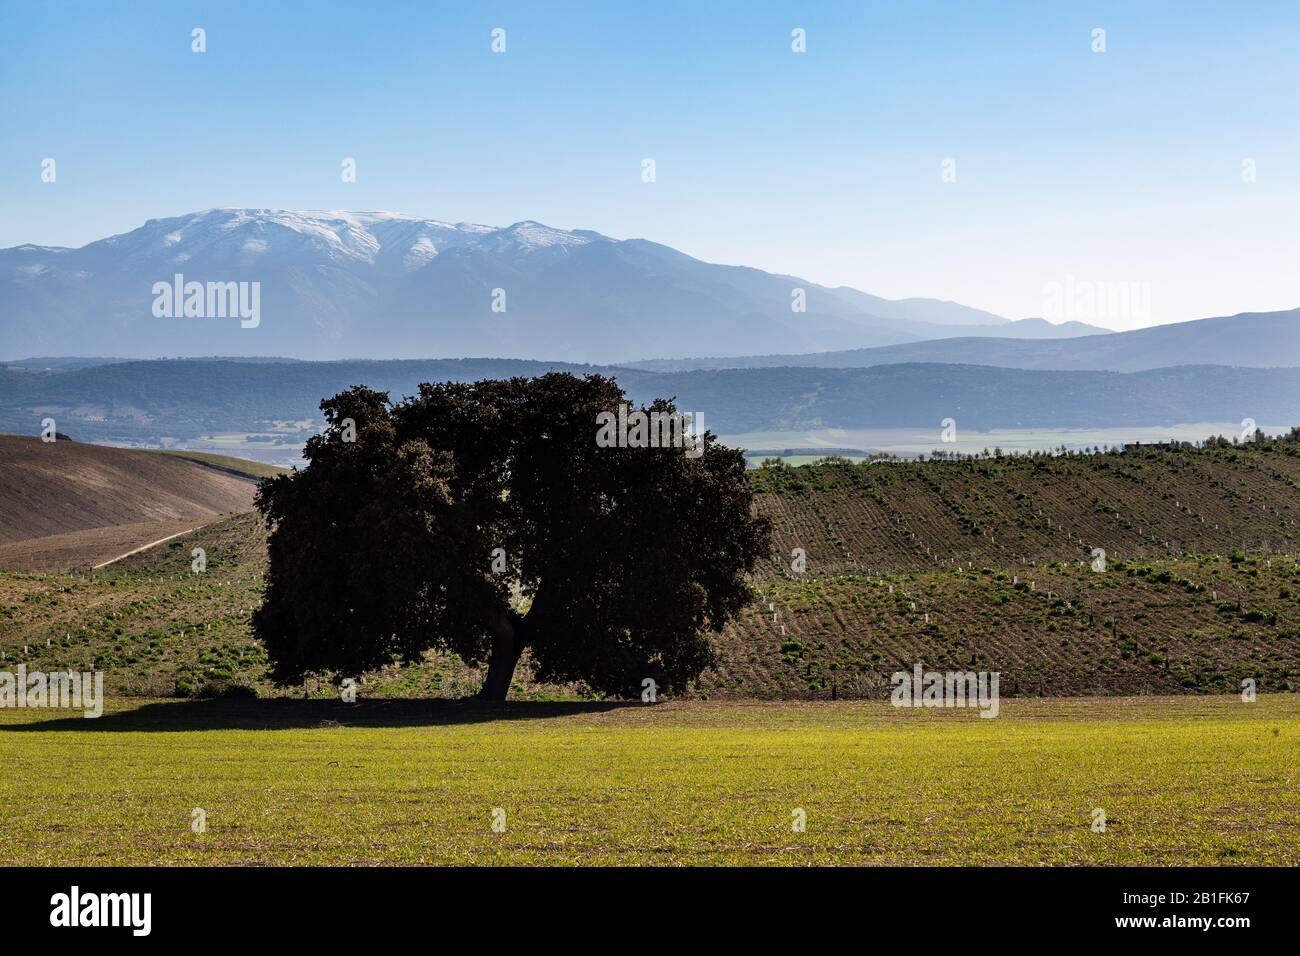 A lone tree amongst the landscape of Andalucia in Spain Stock Photo